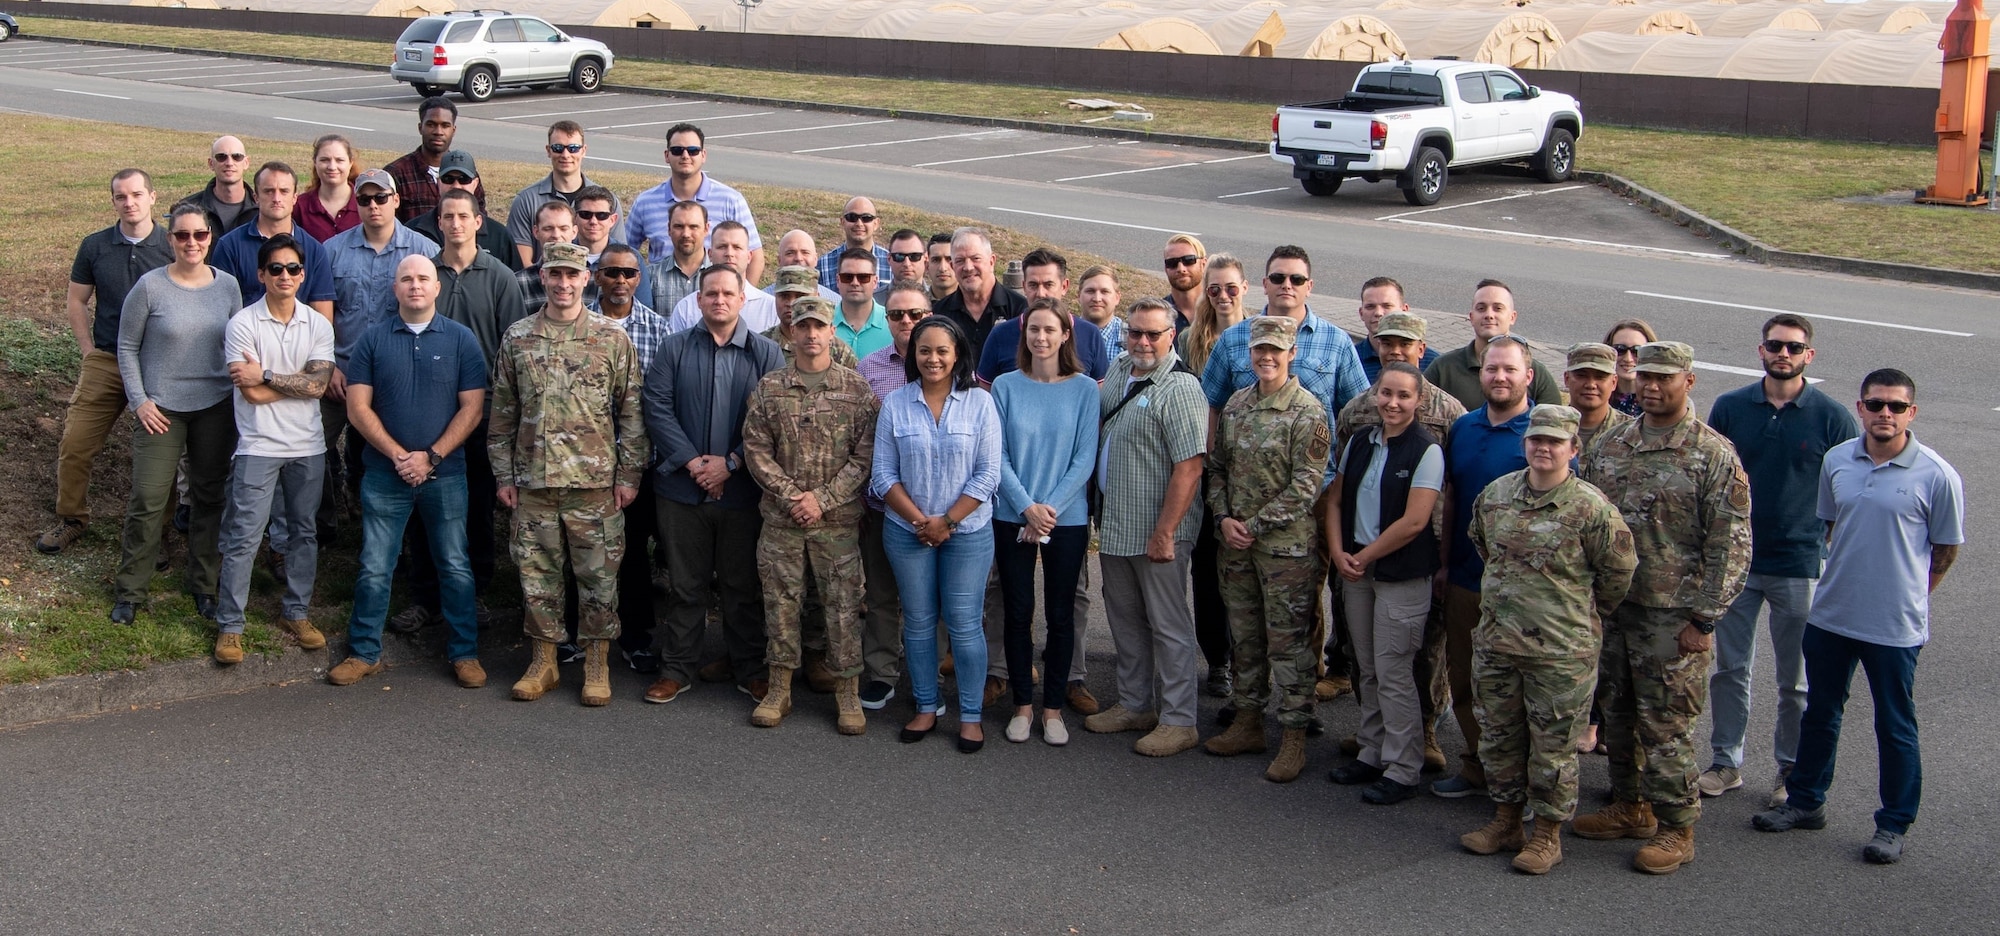 Col. Terrence M. Joyce, Office of Special Investigations Field Investigations Region 5 Commander, third from left in front row, is joined by members of one of the two 5 FIR Screening Teams assembled at Ramstein Air Base, Germany, to support Operation Allies Refuge. (Photo submitted by 5 FIR)